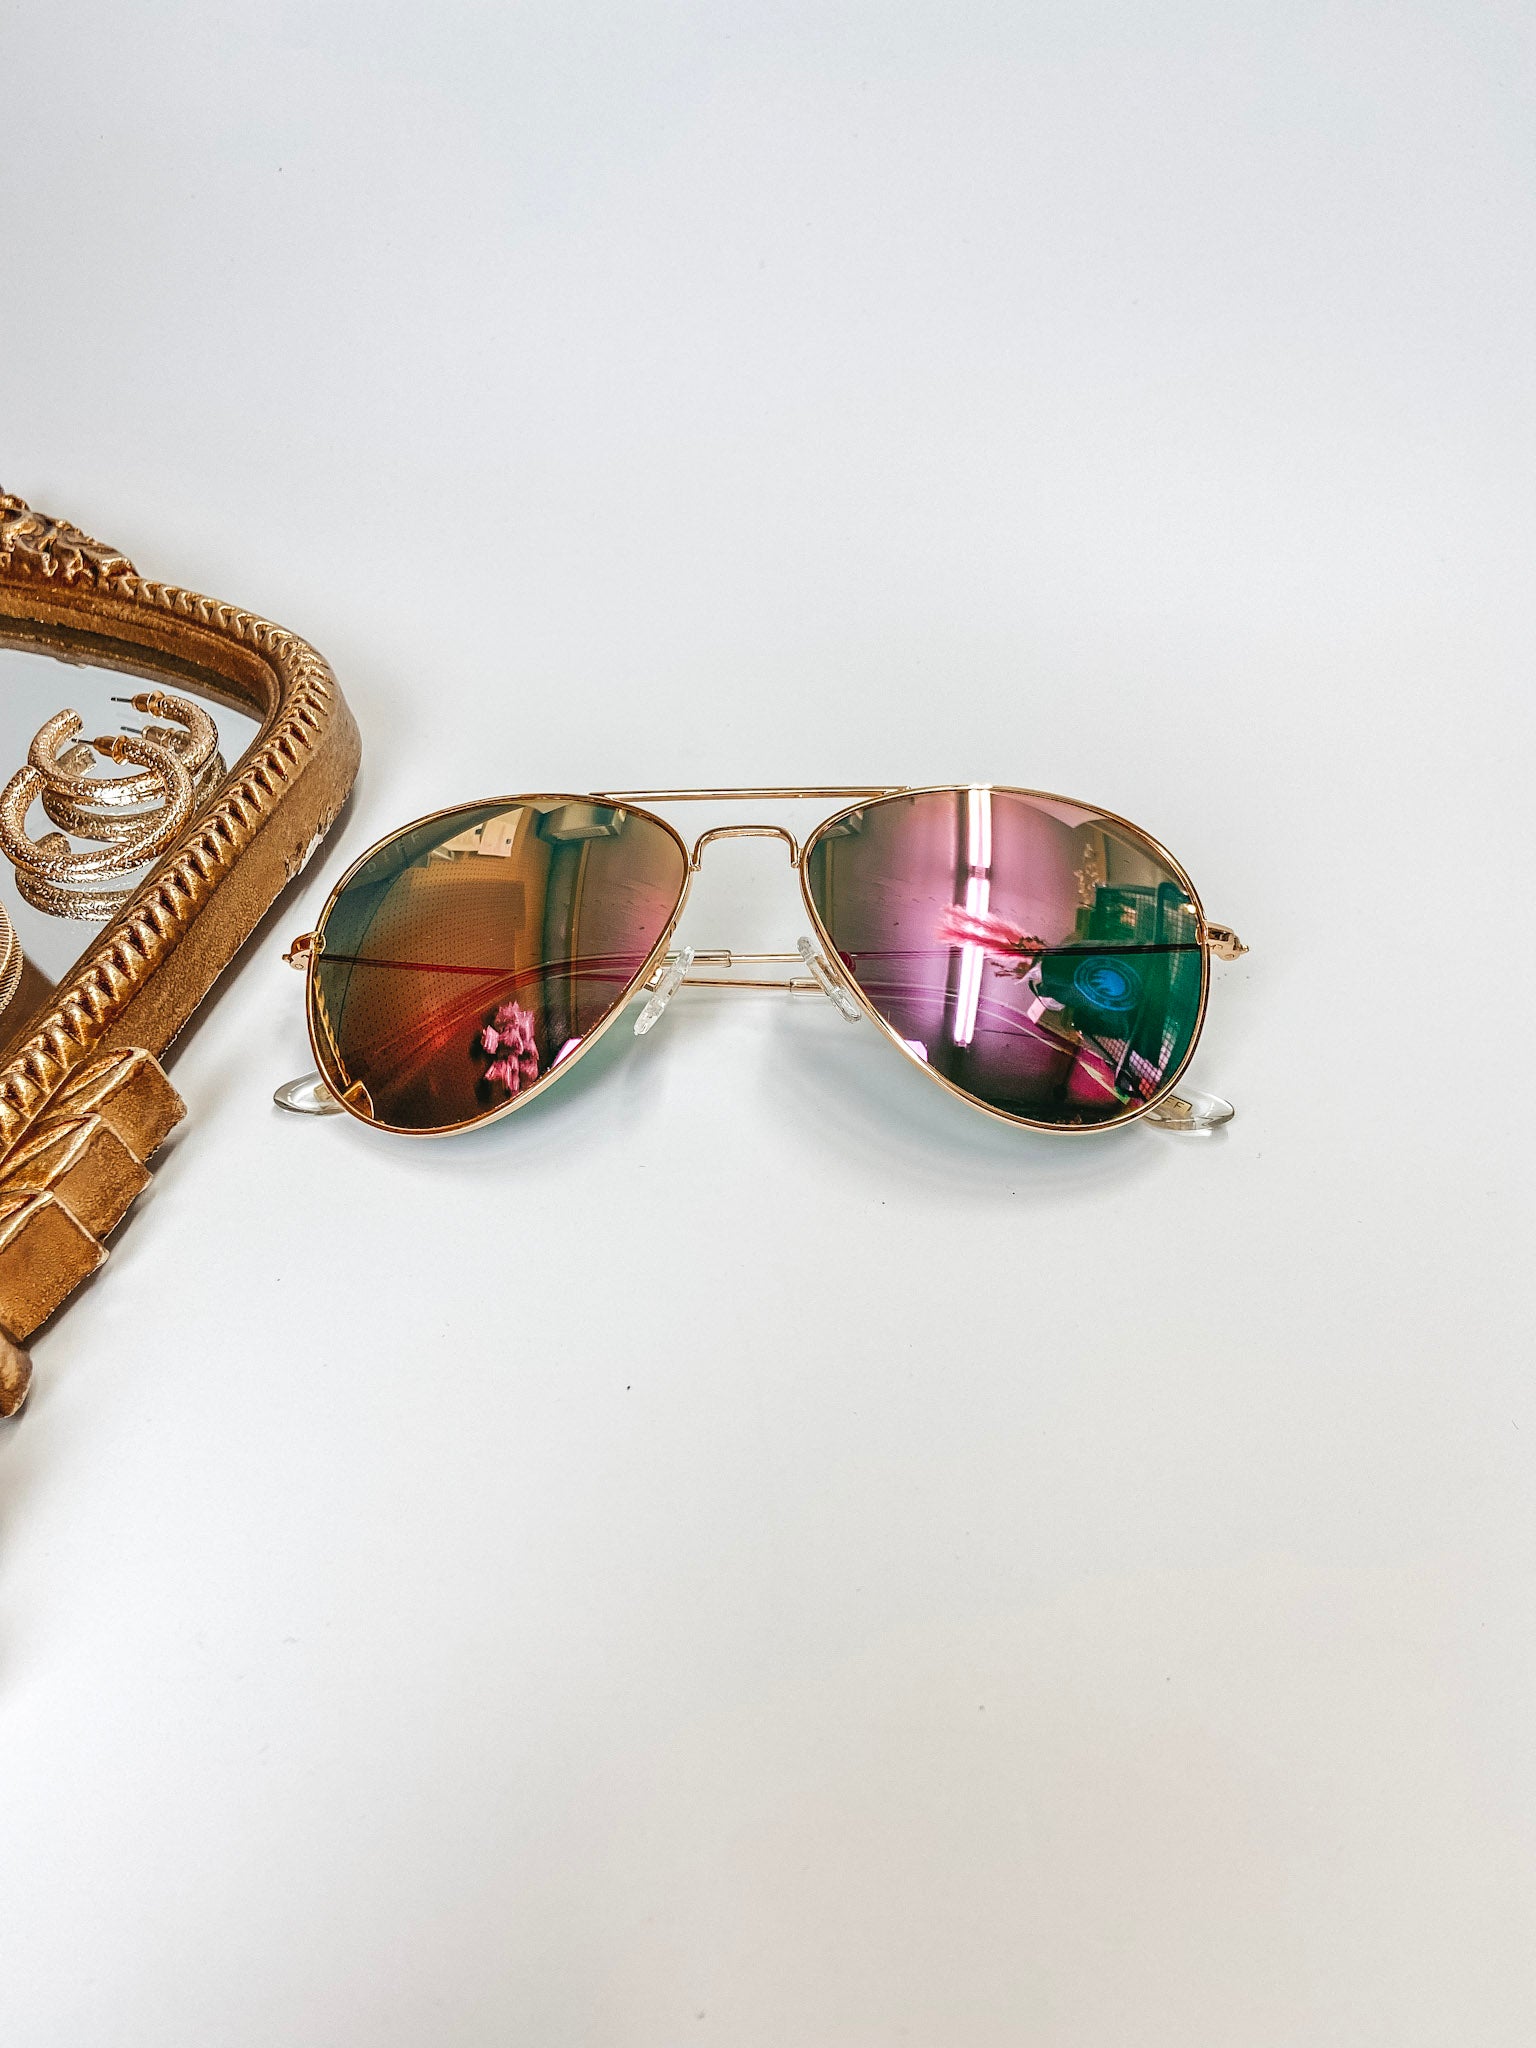 DIFF | Cruz Pink Mirror Aviator Sunglasses in Gold Tone - Giddy Up Glamour Boutique